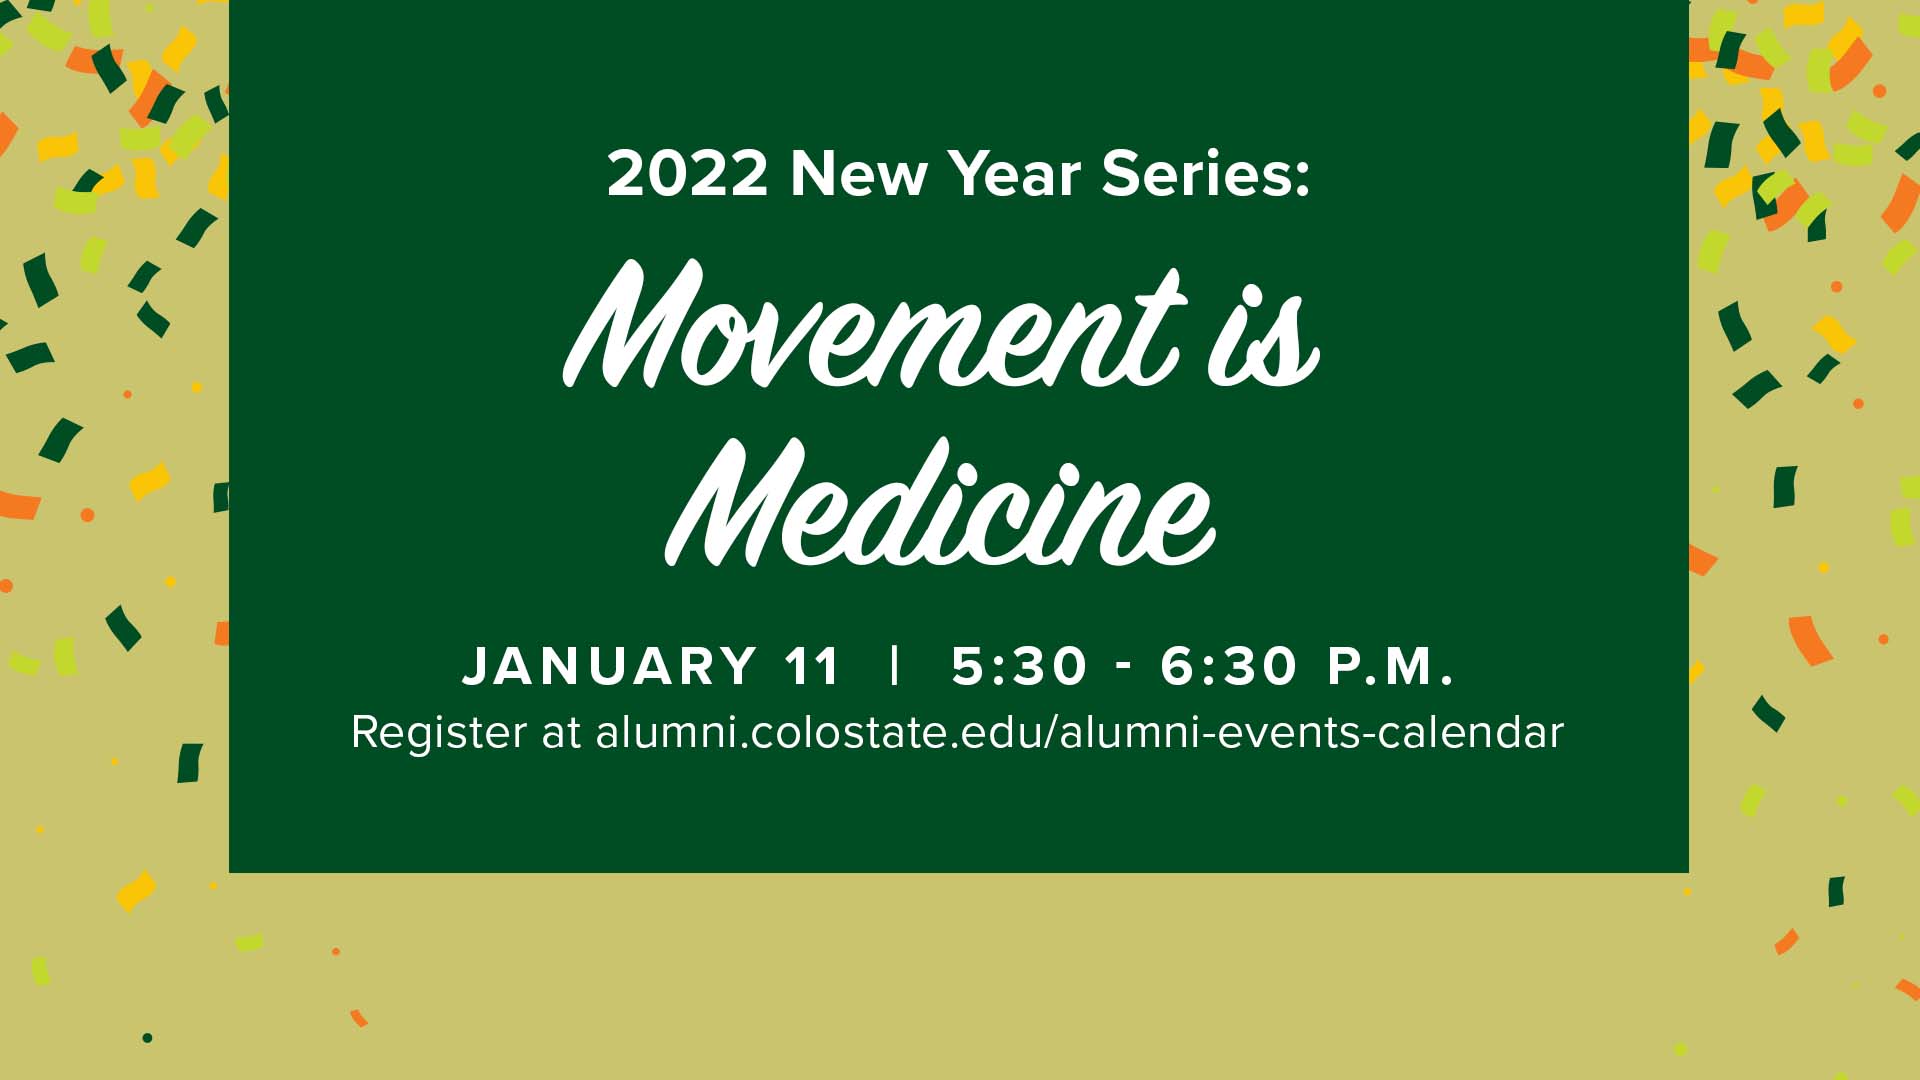 Image for New Year Series: Movement is Medicine webinar